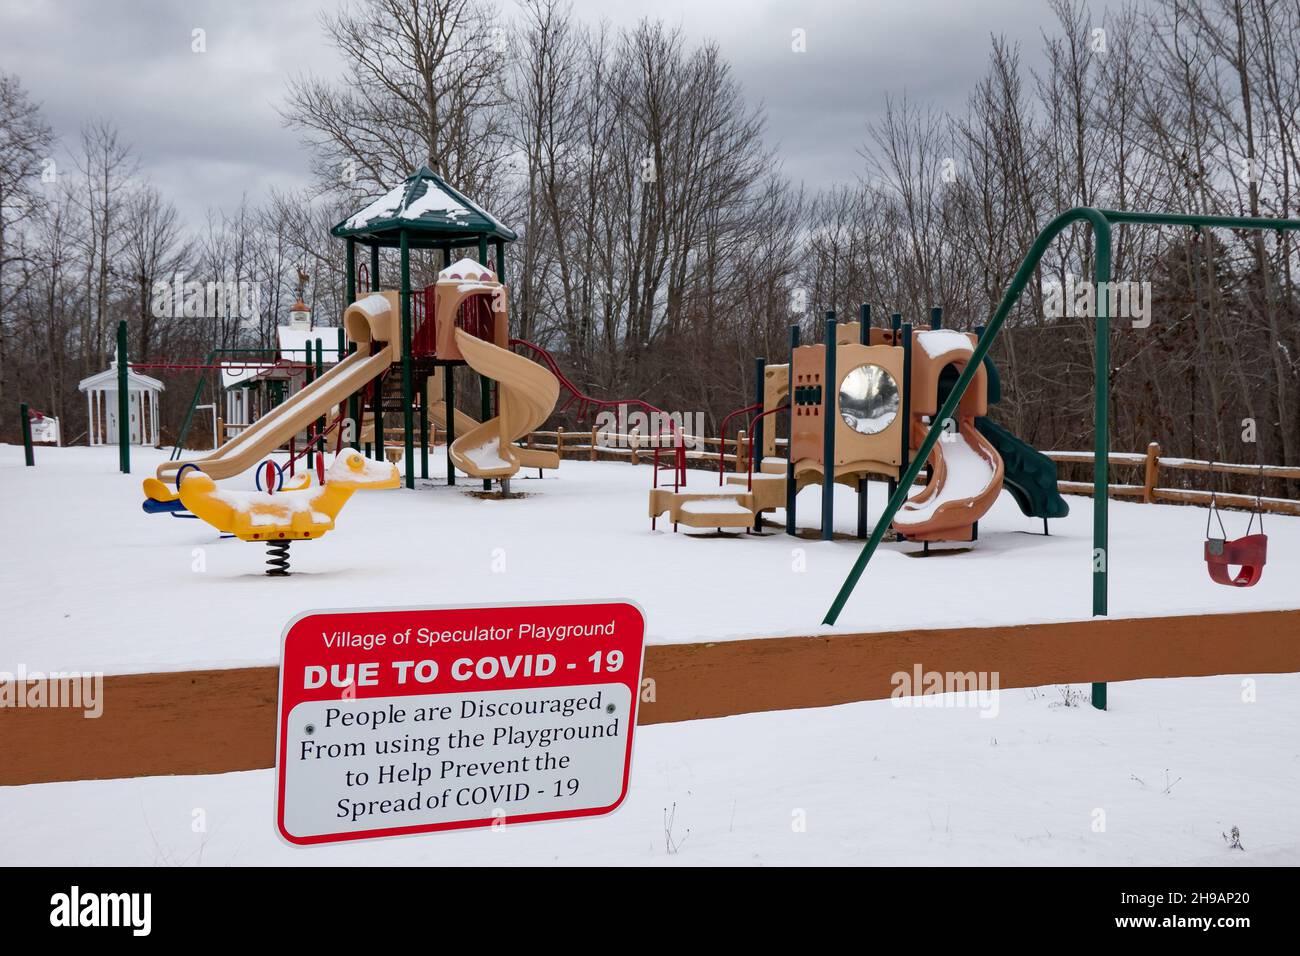 An empty snow covered playground in Speculator, NY USA with a COVID-19 warning sign discouraging use. Stock Photo